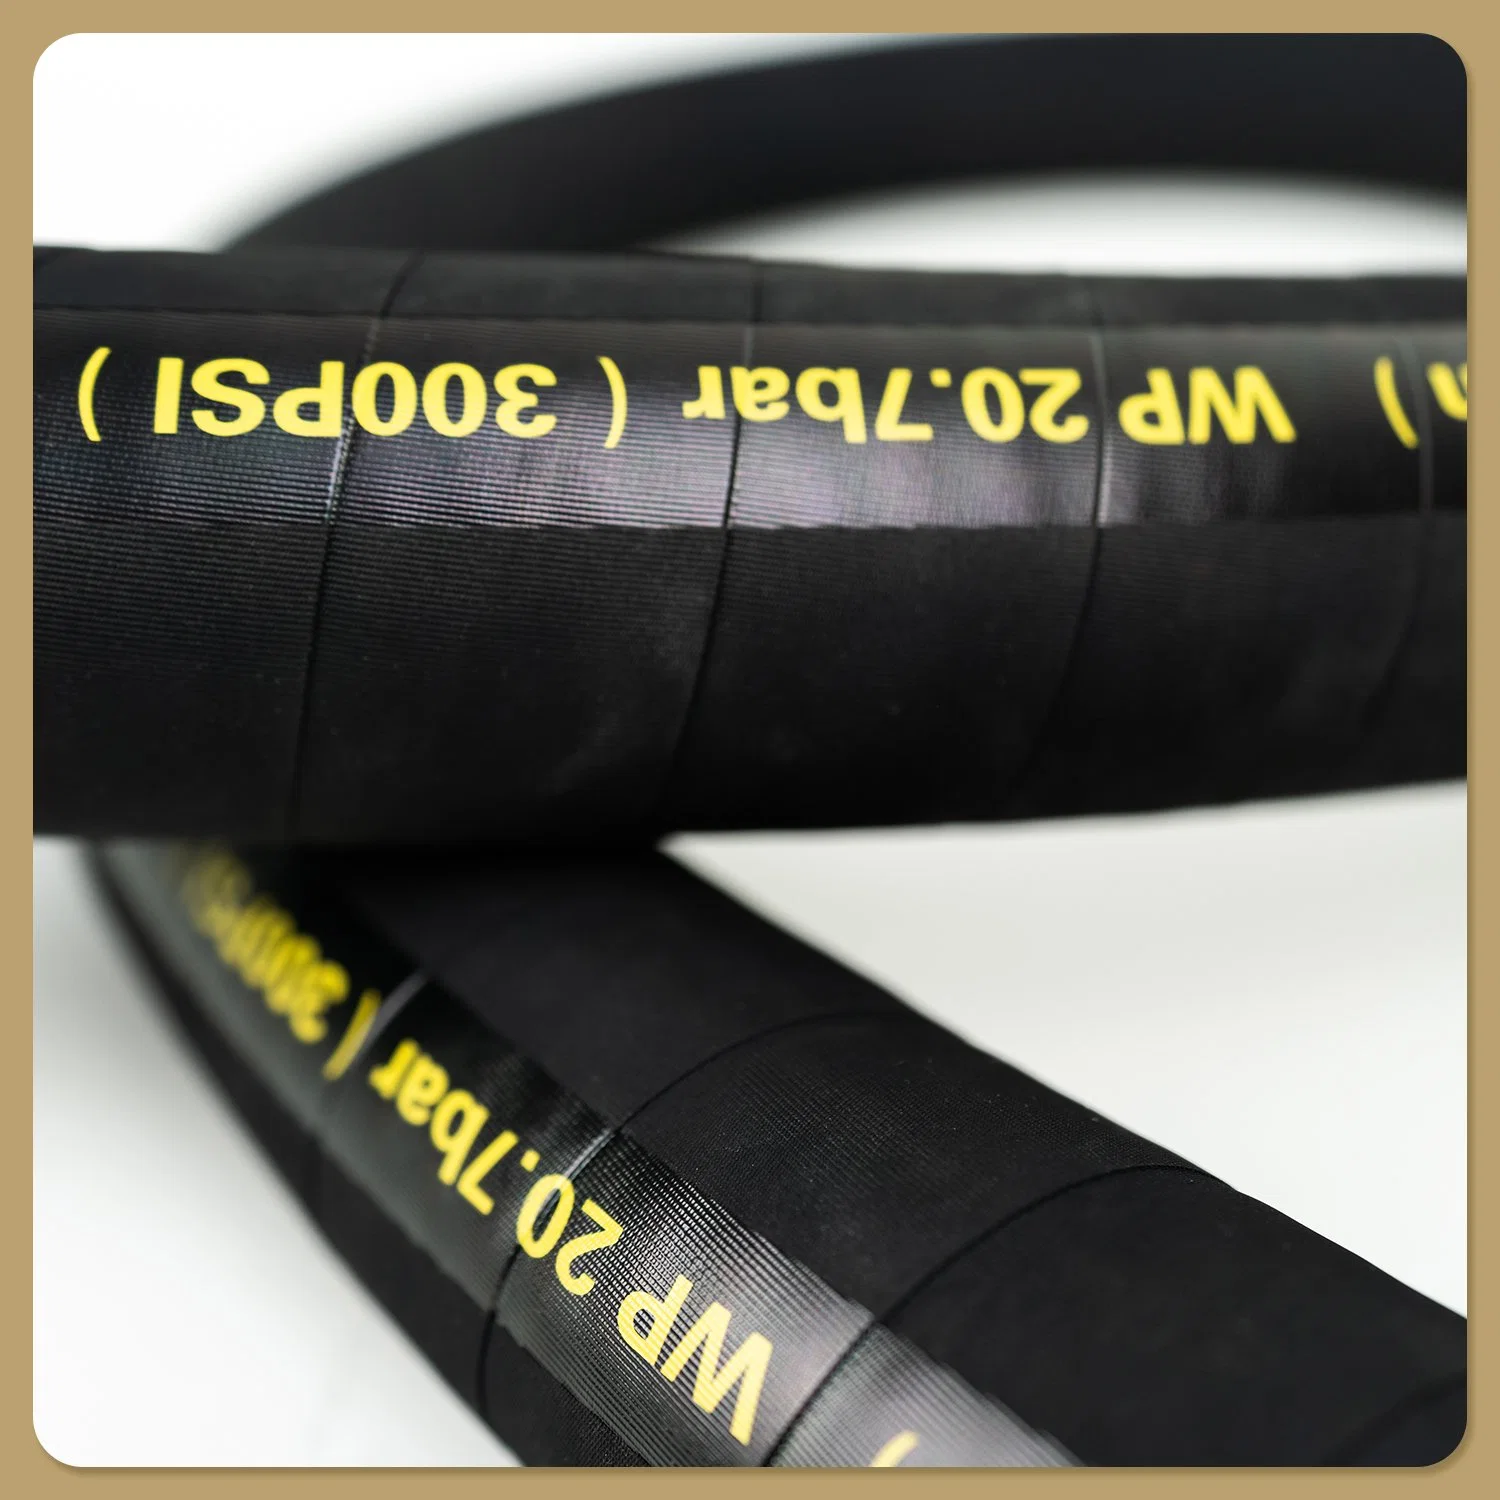 Rubber Hose for Oil/Fuel/Gasoline Delivery with Steel Wire Reinforcement and High Pressure